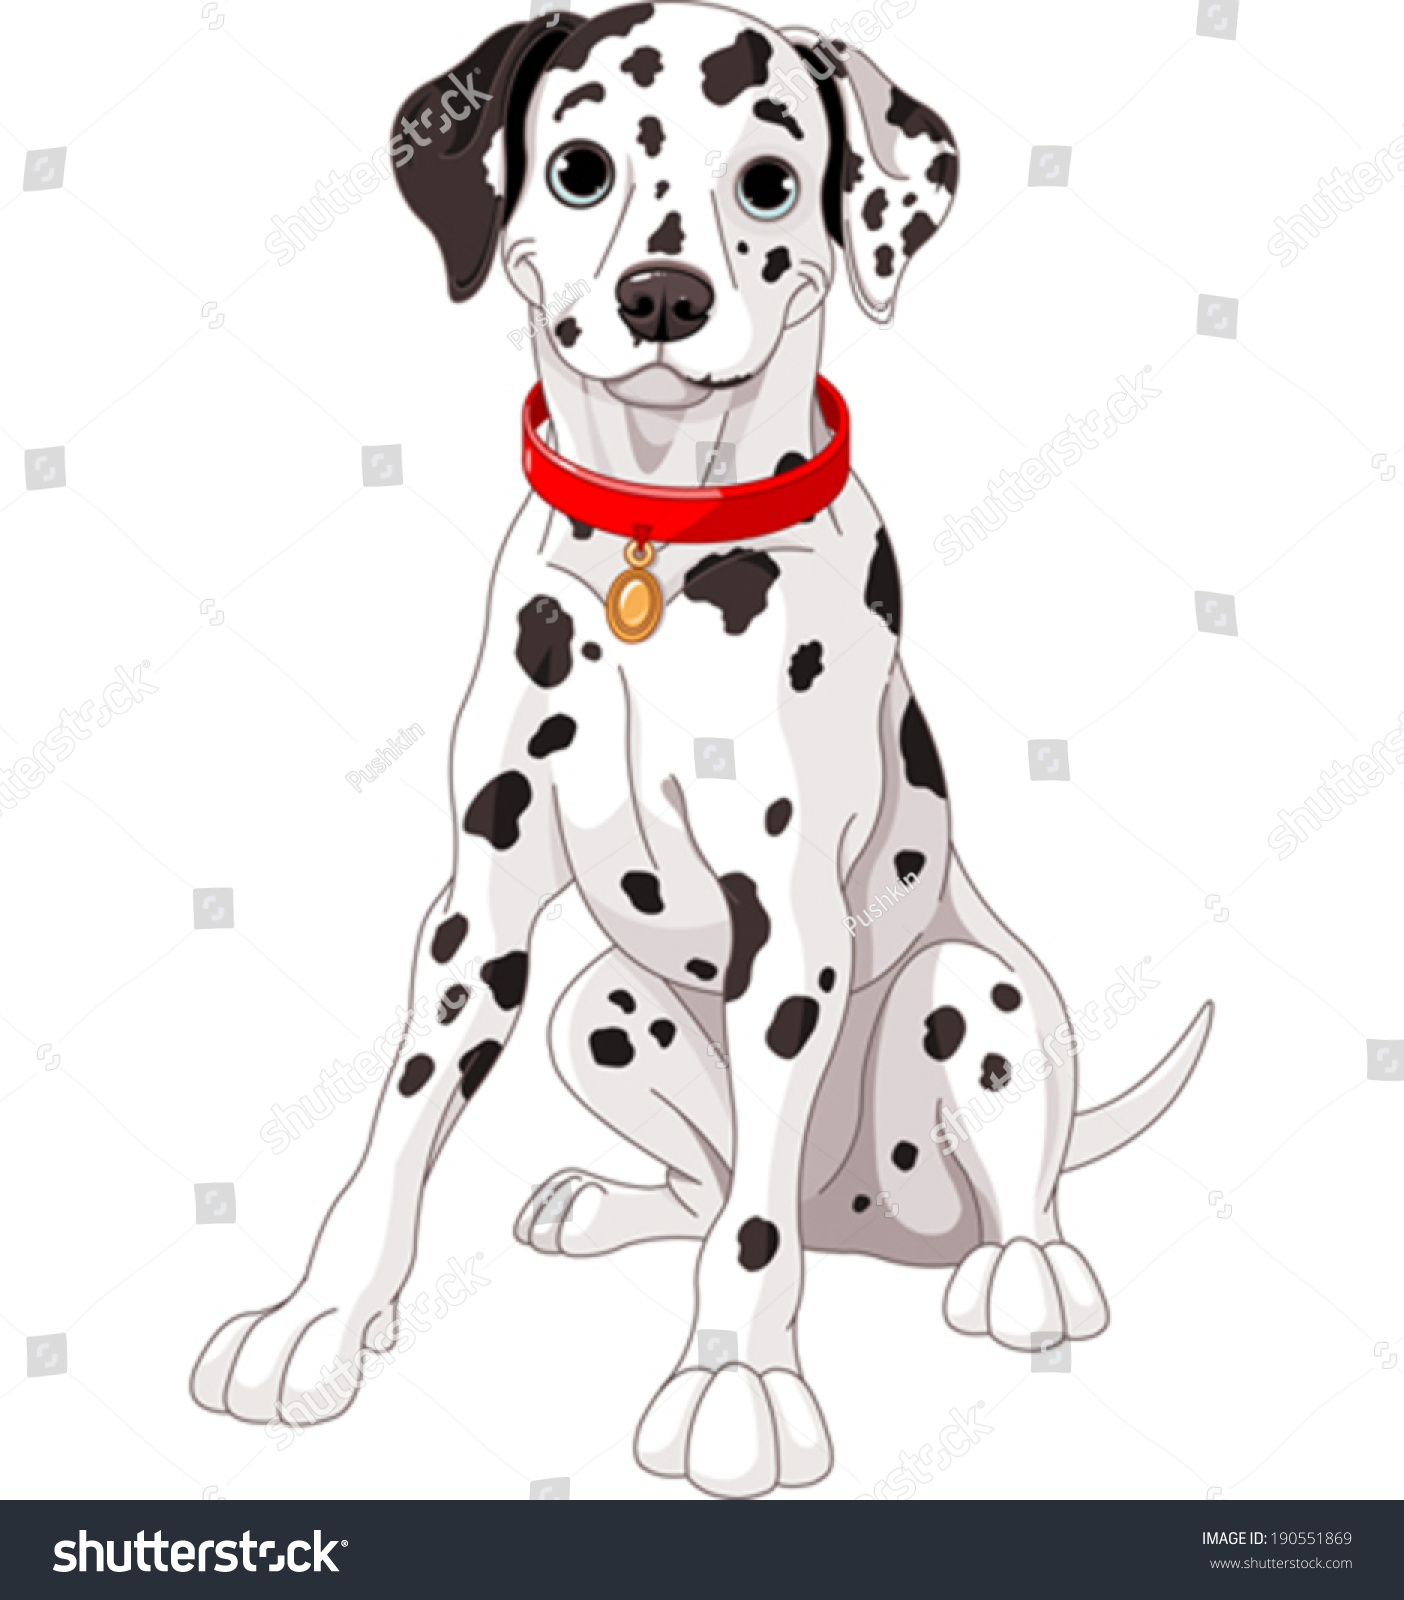 SVG of Illustration of a cute Dalmatian dog wearing a red collar svg